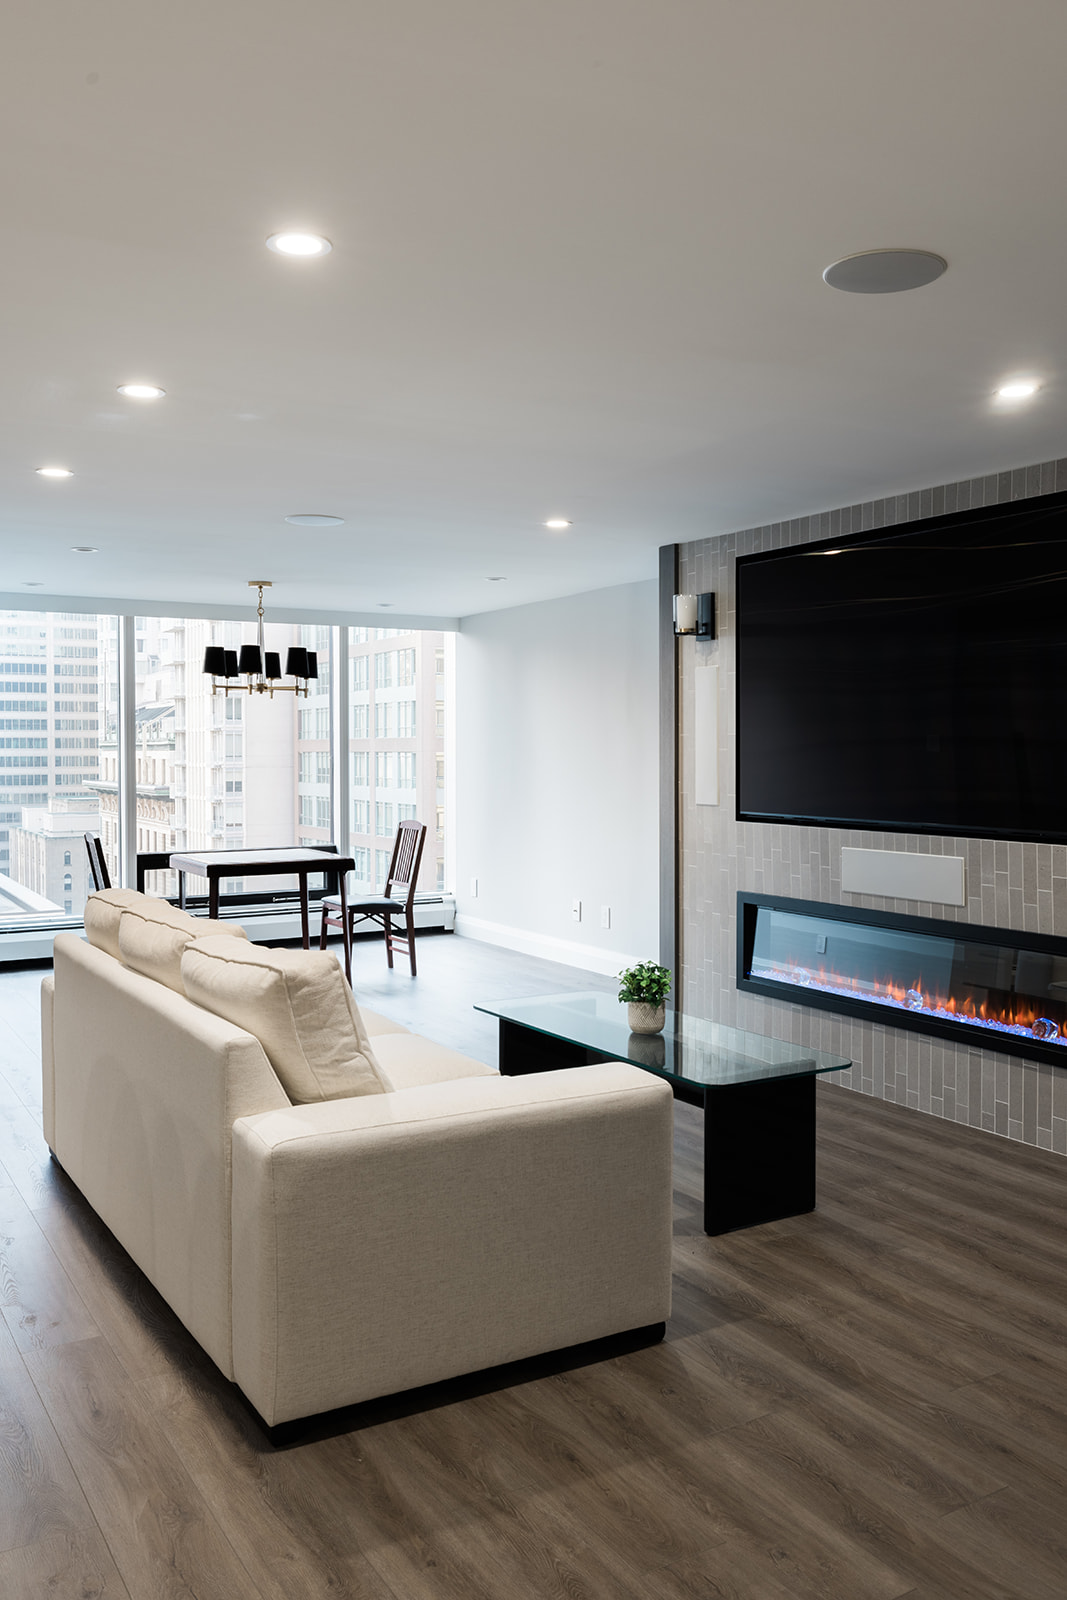 Luxury downtown Toronto condo renovation living room space with floor-to-ceiling windows and recessed lighting by Golden Bee Condos